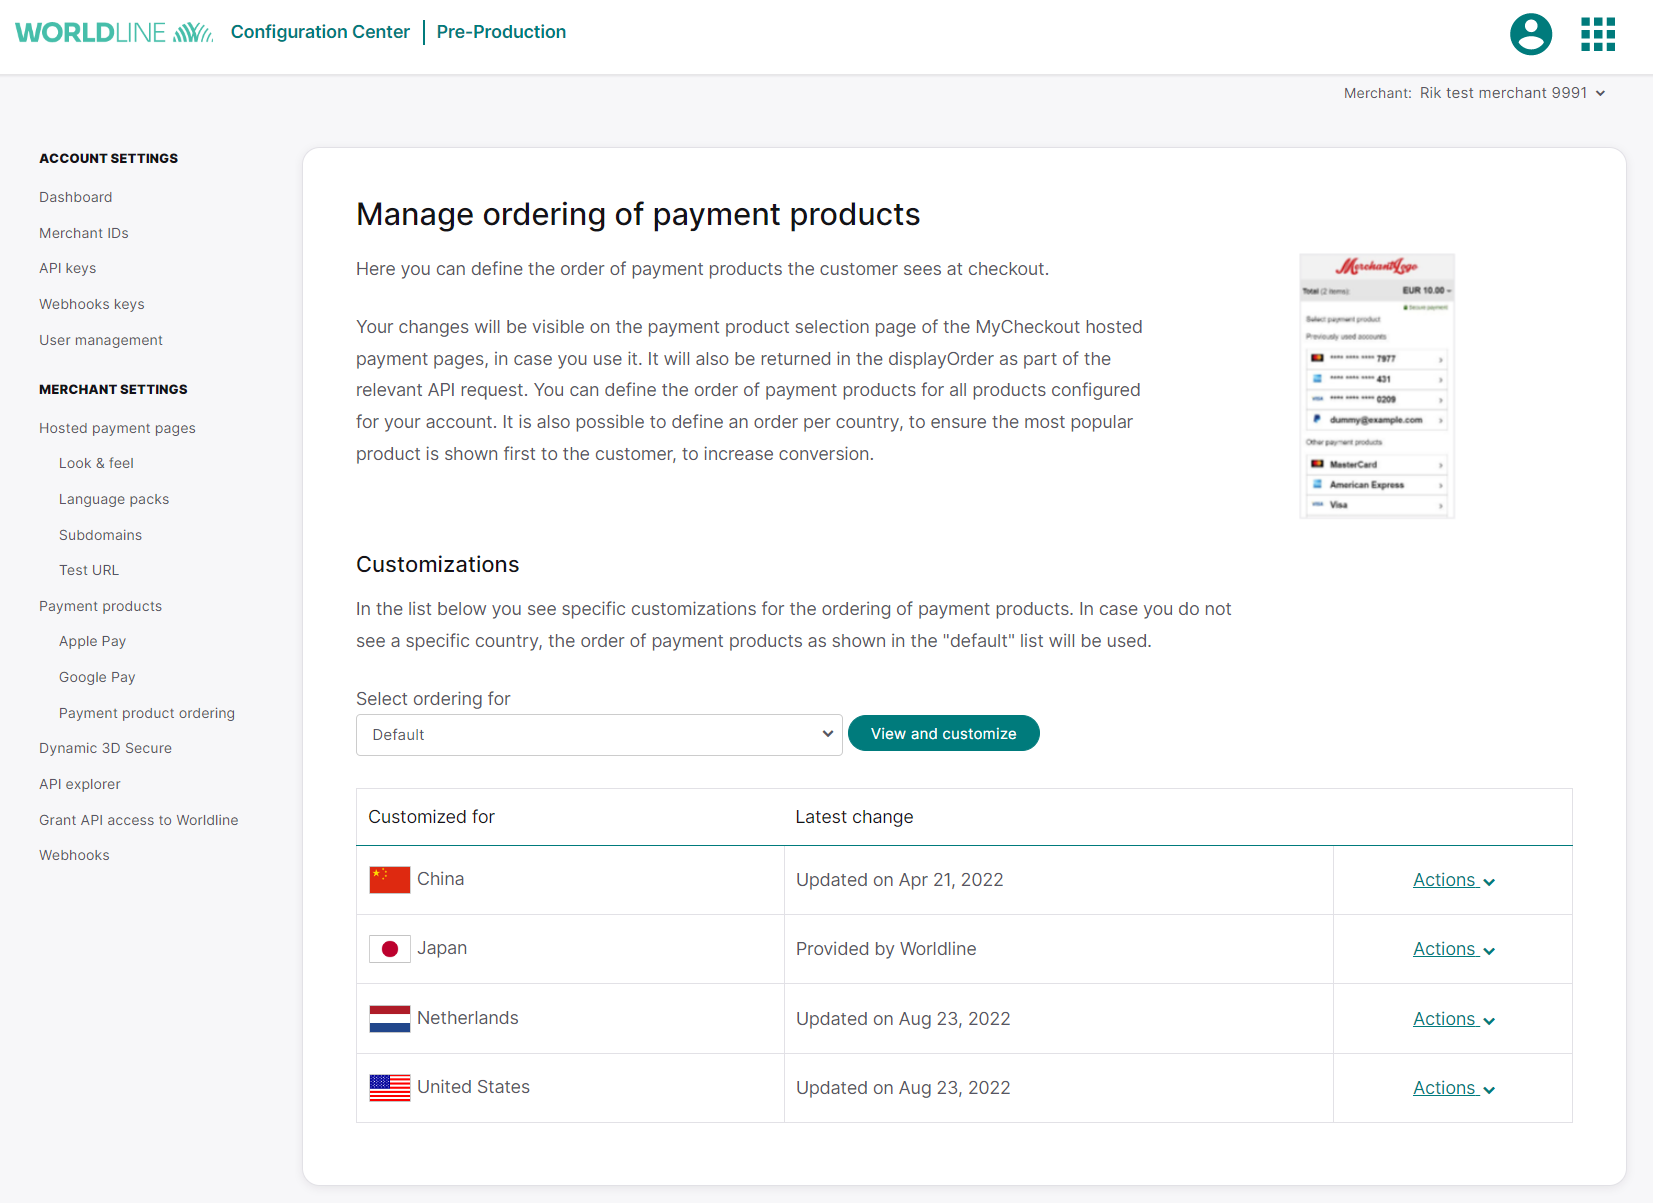 Payment product ordering menu